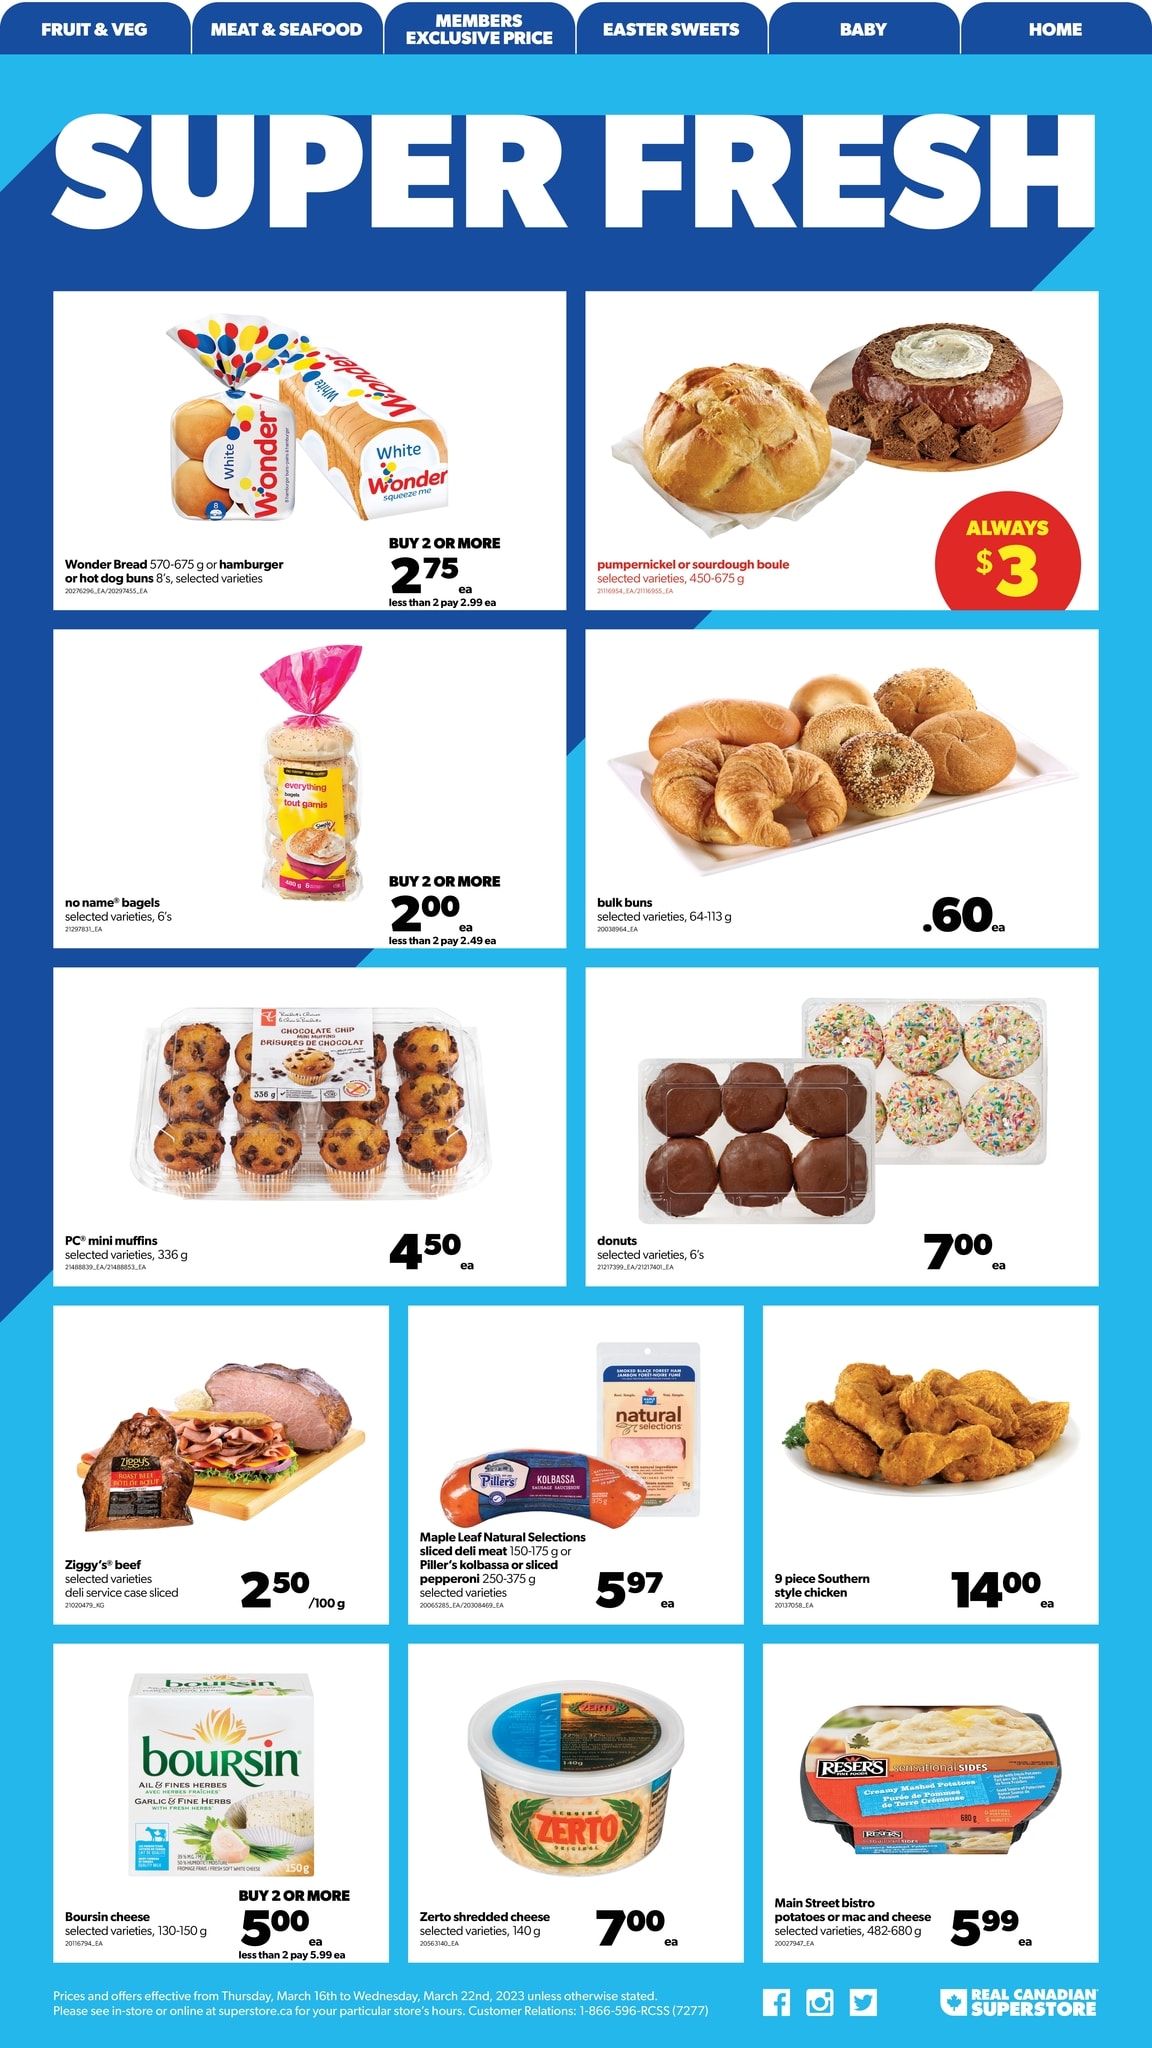 Real Canadian Superstore - Ontario - Weekly Flyer Specials - Page 4